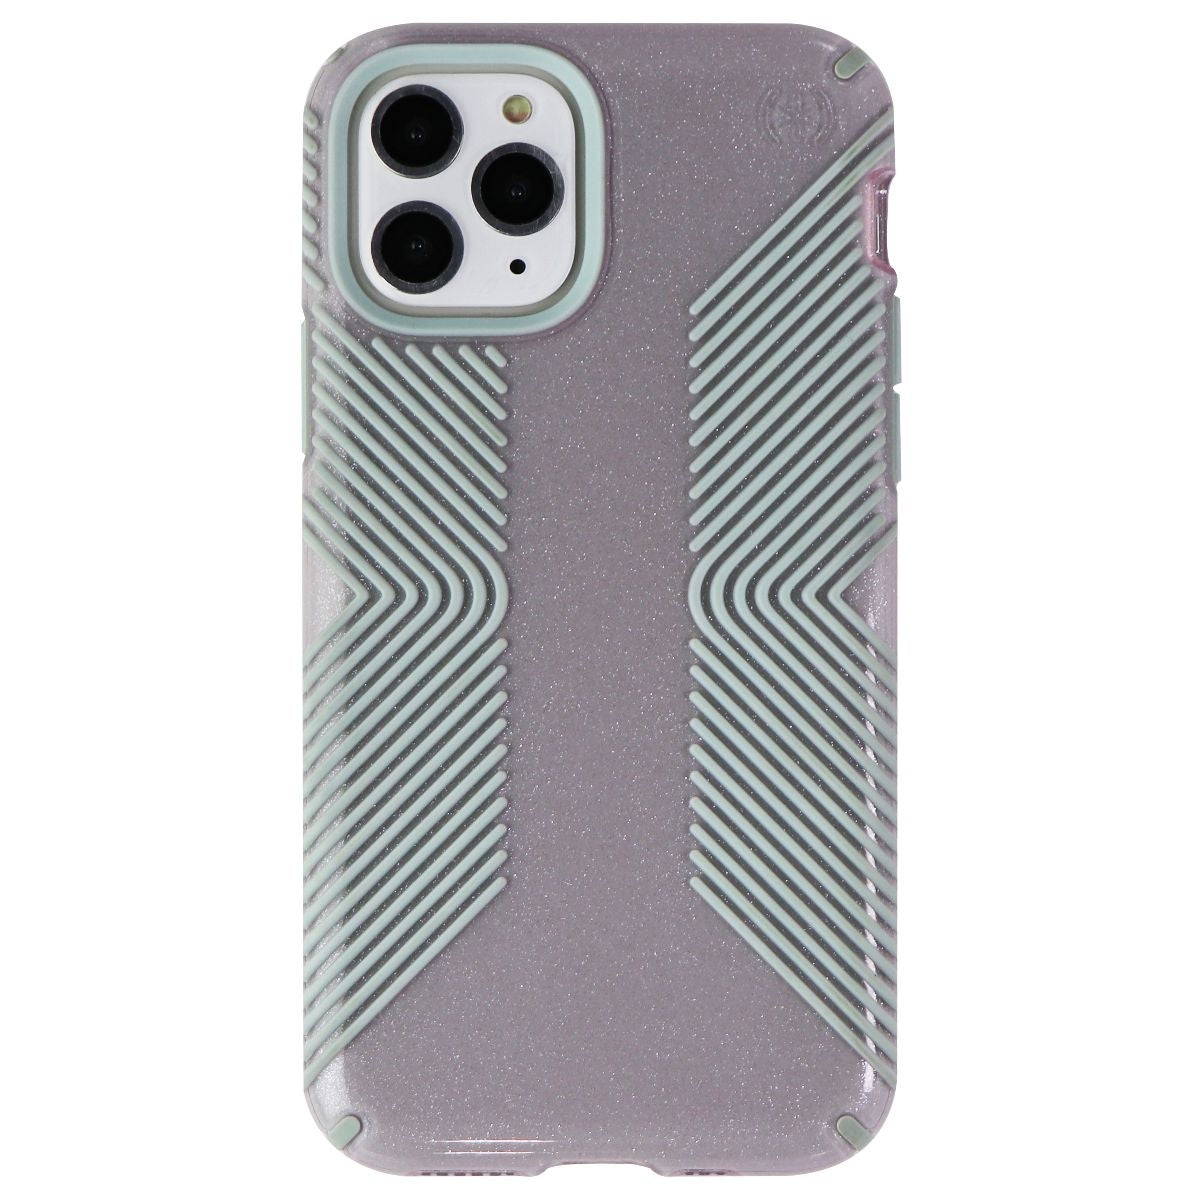 Speck Presidio Grip + Glitter Case for iPhone 11 Pro - Whitestone Gray/Blue Cell Phone - Cases, Covers & Skins Speck    - Simple Cell Bulk Wholesale Pricing - USA Seller